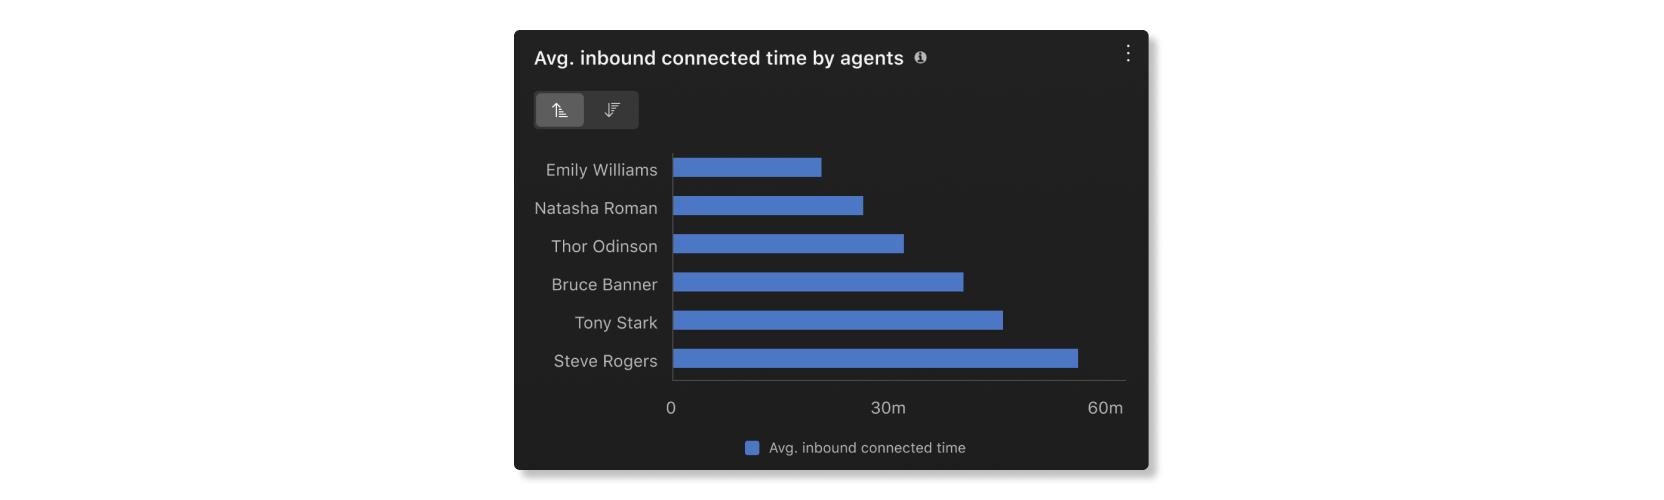 Avg. inbound connected time by agents chart in Agents statistics of Customer Essentials analytics